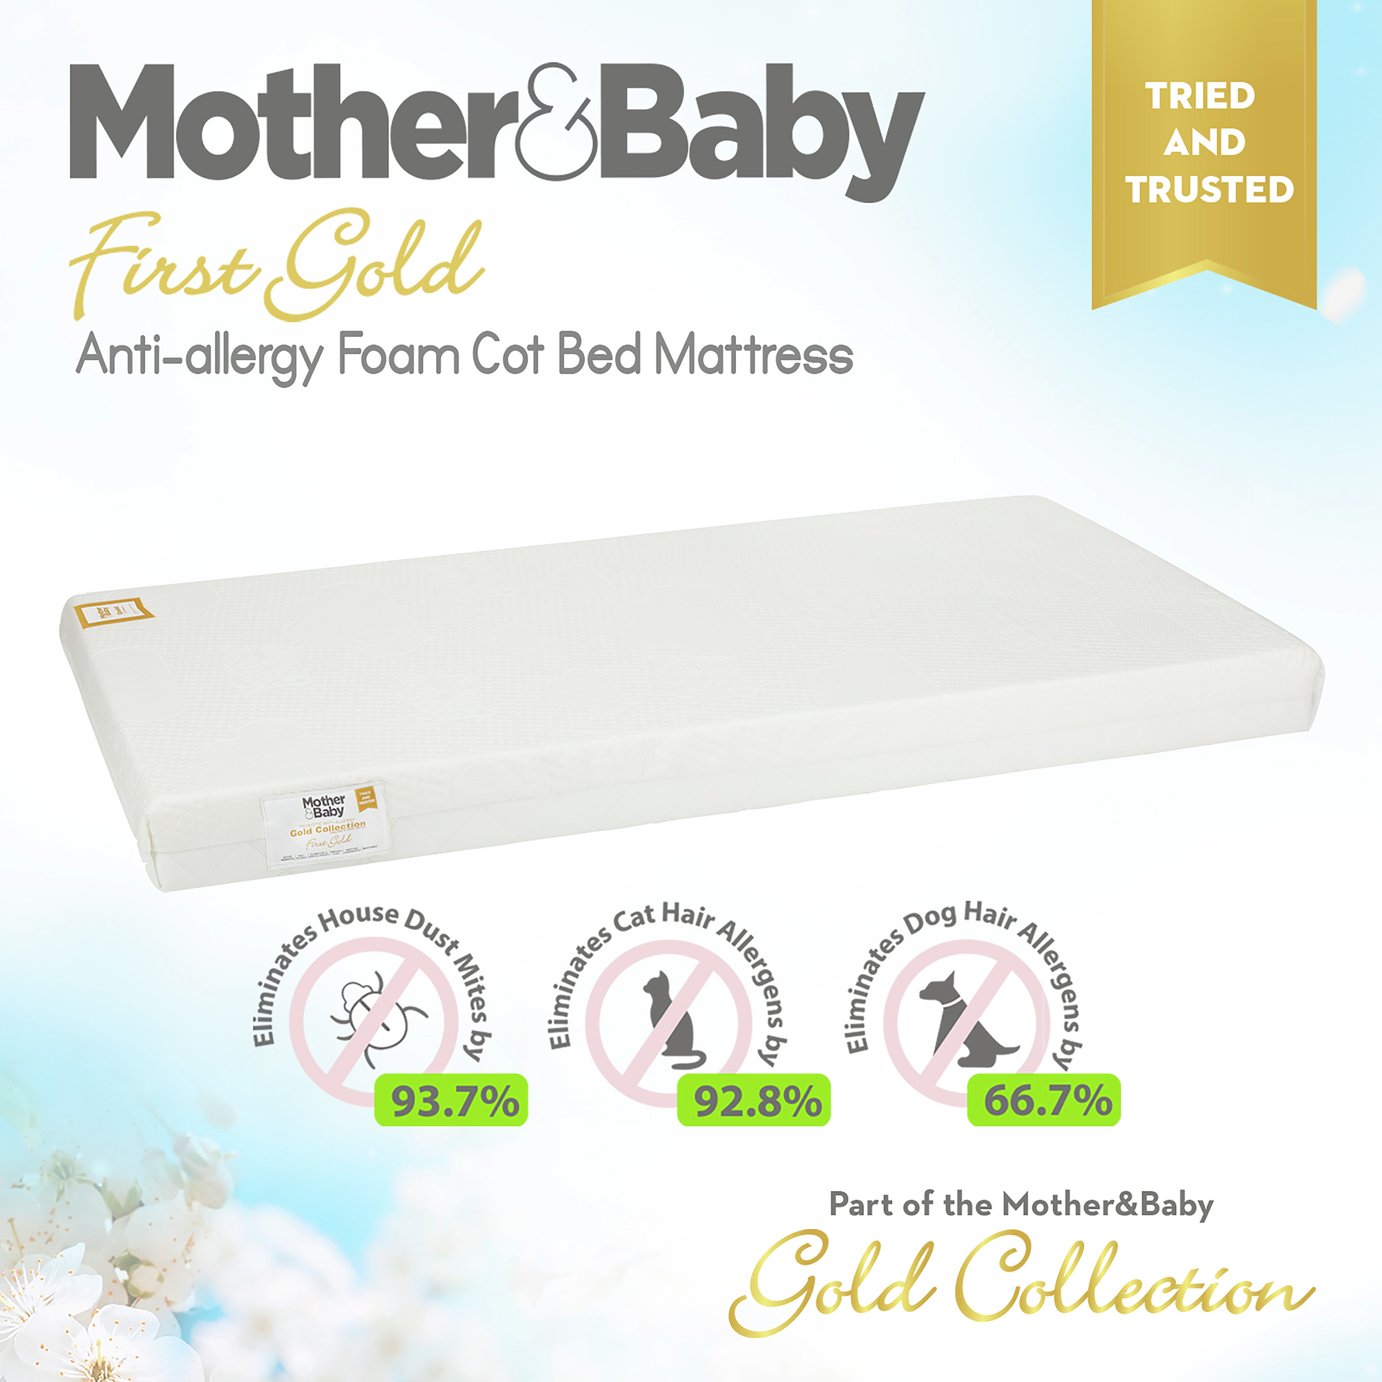 Mother&Baby 140 x 70cm Anti-Allergy Foam Cot Bed Mattress Review